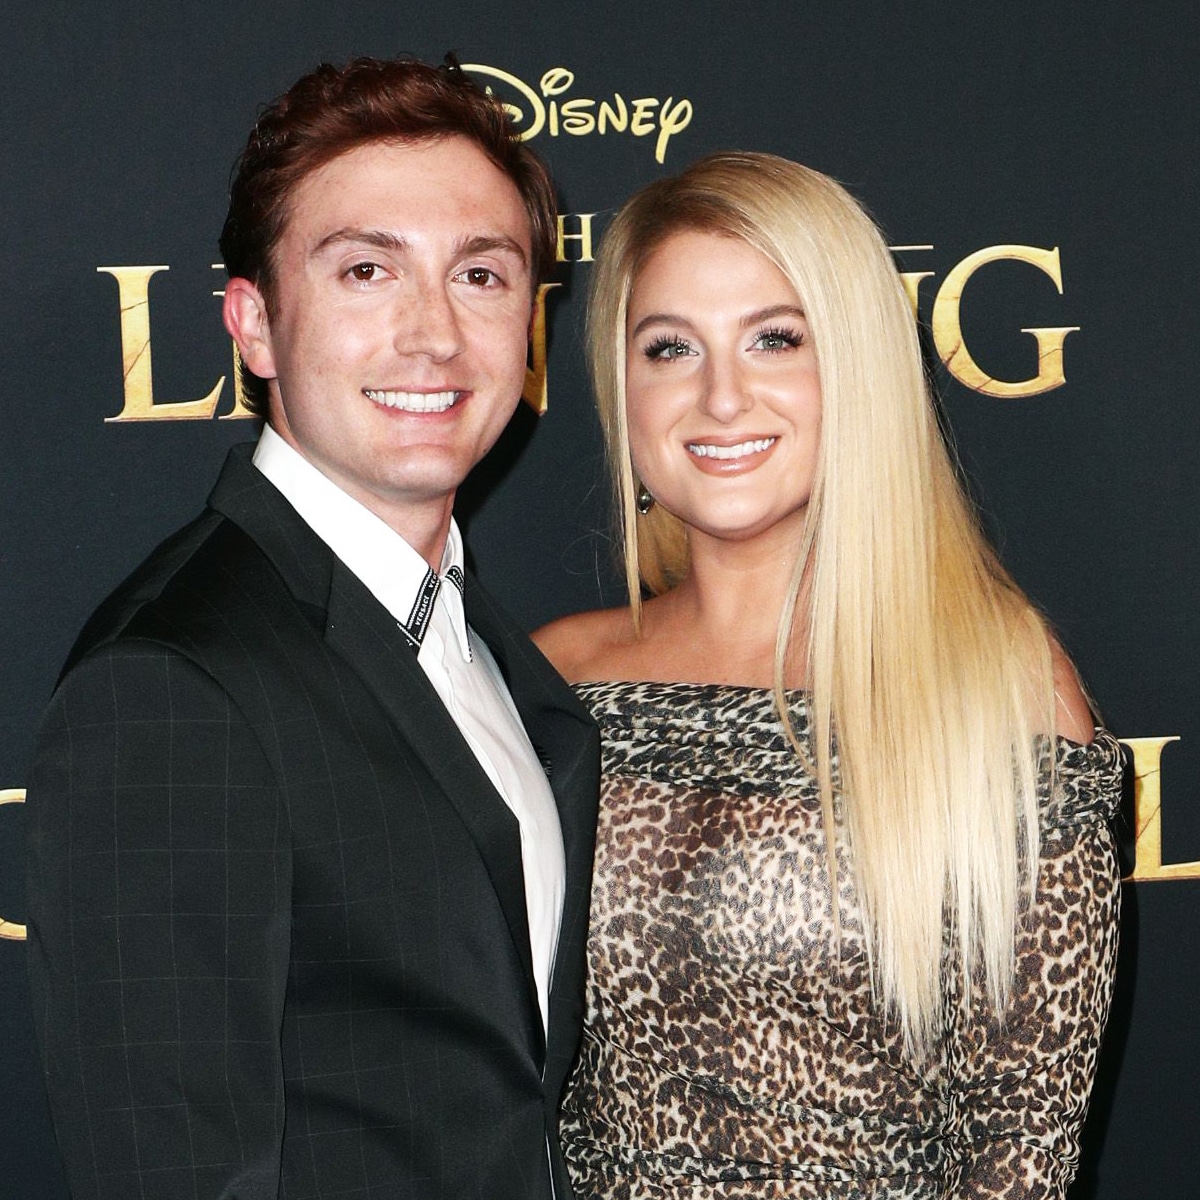 Who Is Meghan Trainor's Husband? Complete Relationship Timeline!